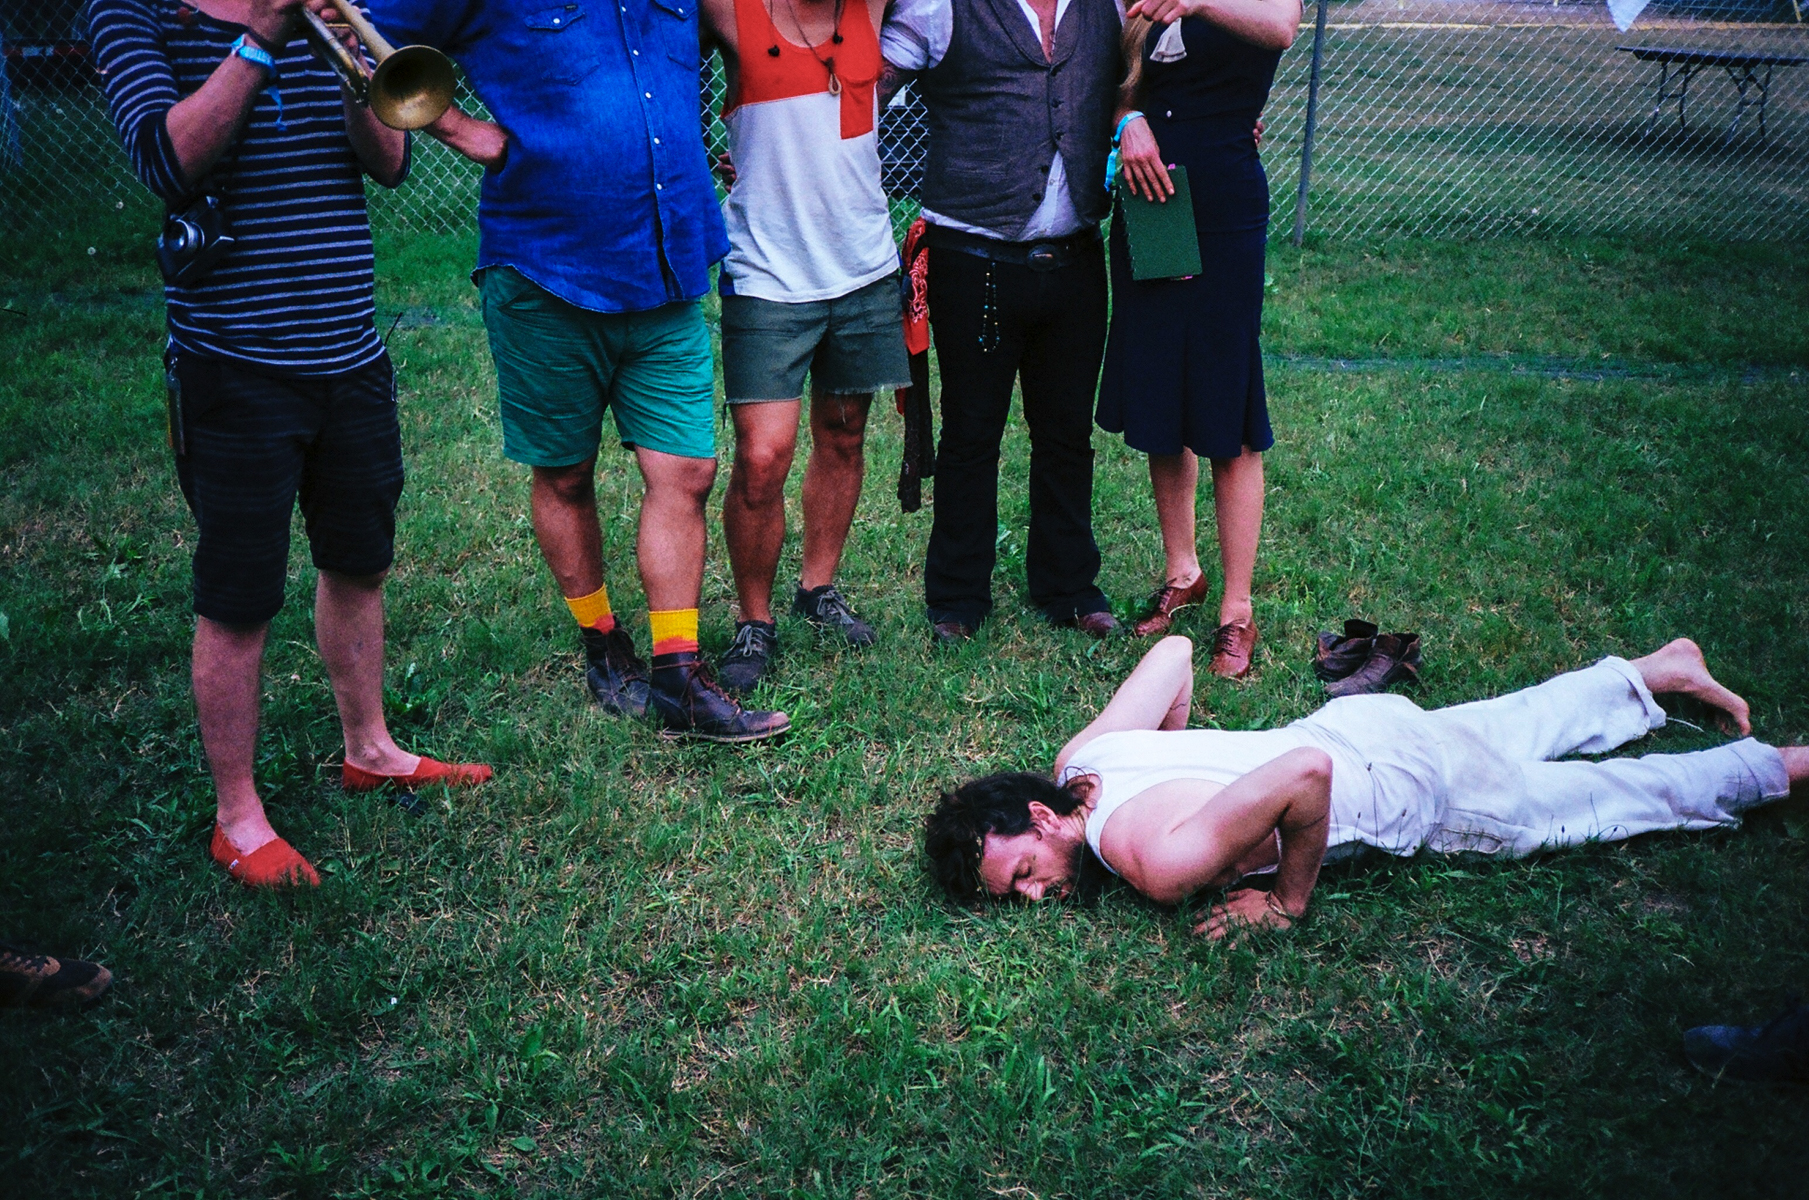  Edward Sharpe and the Magnetic Zeros 